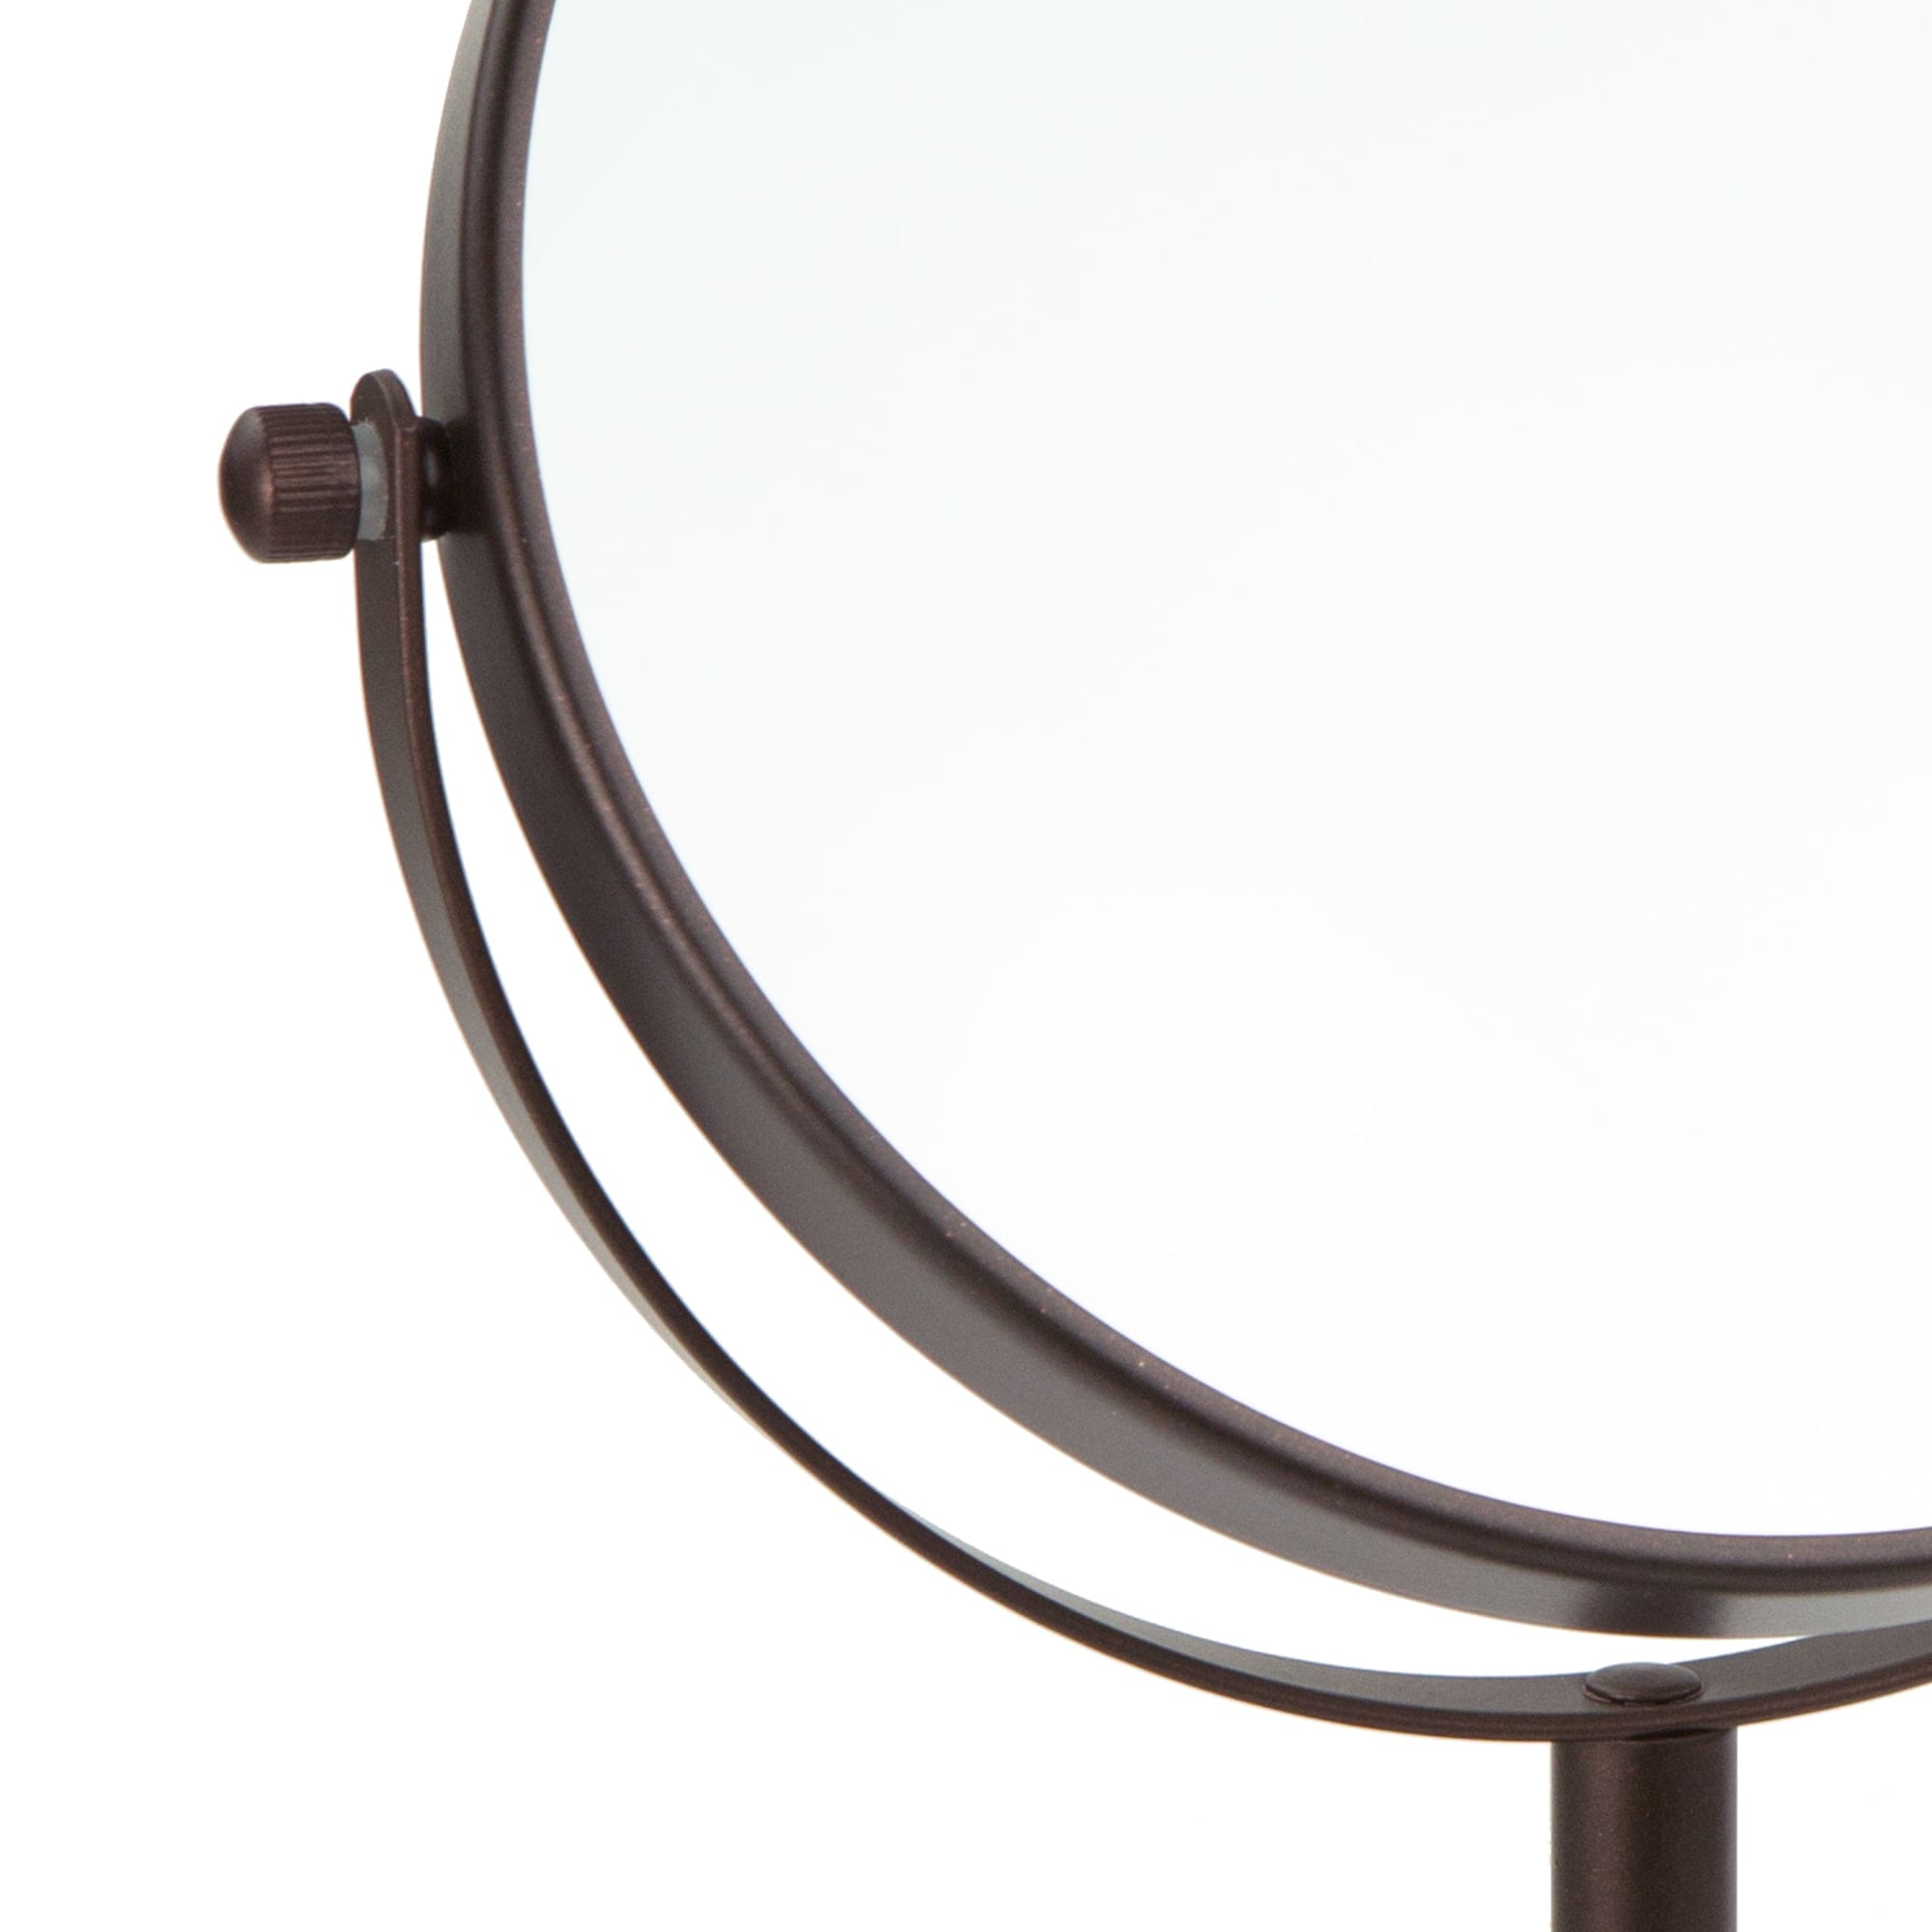 Home Basics Elizabeth Collection Double Sided Cosmetic Mirror, Bronze $15.00 EACH, CASE PACK OF 6